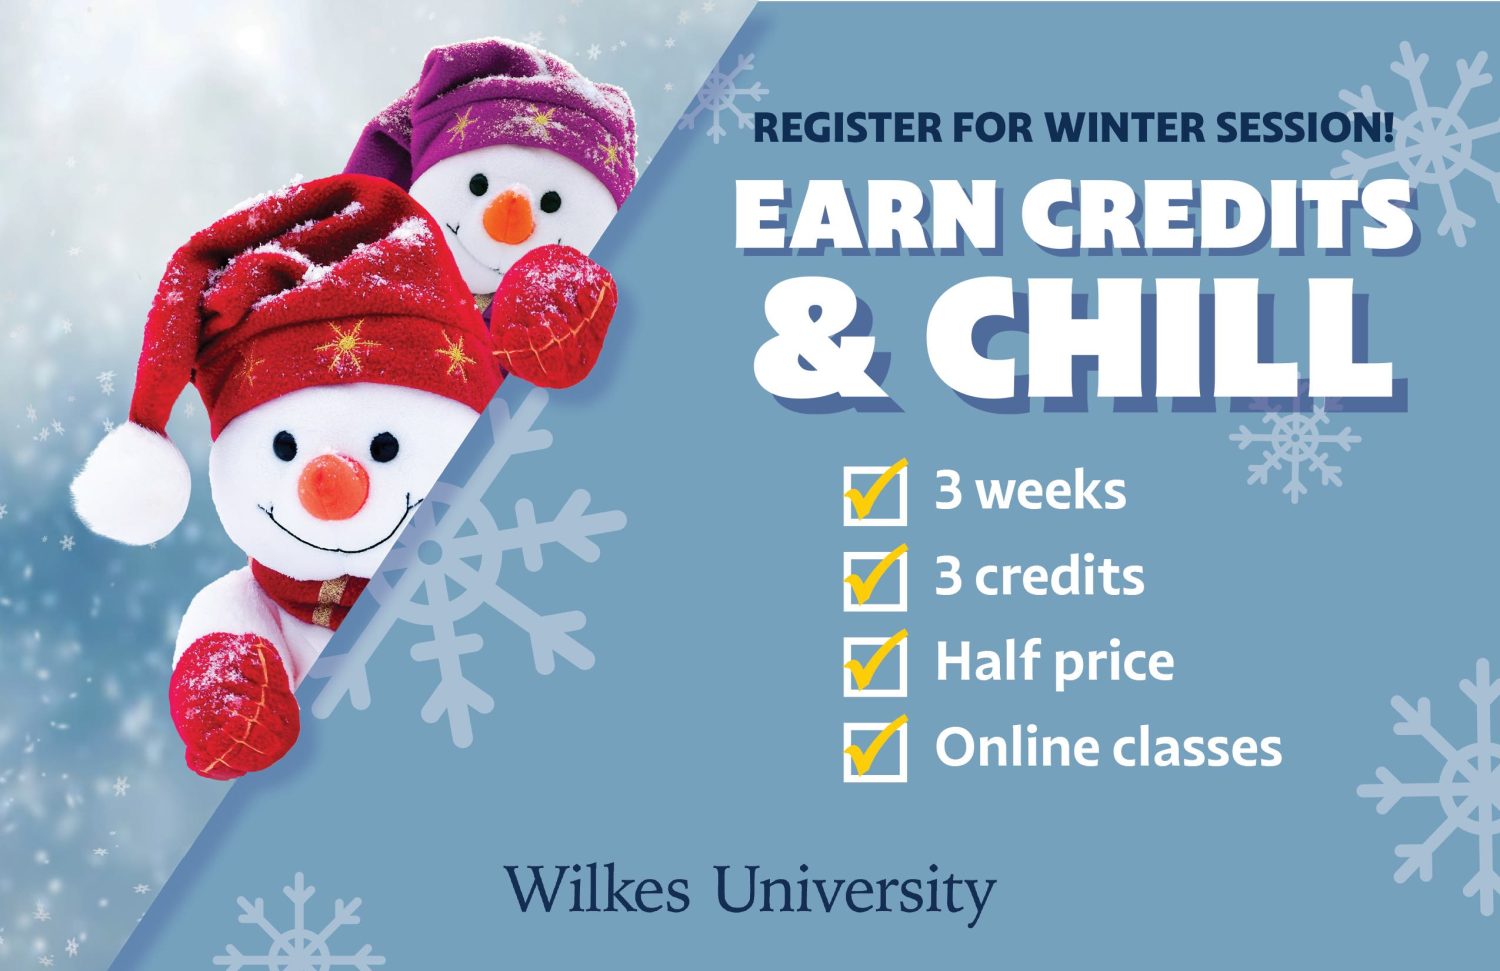 winter session postcard featuring two cartoon snowmen and the phrase "earn credits and chill"